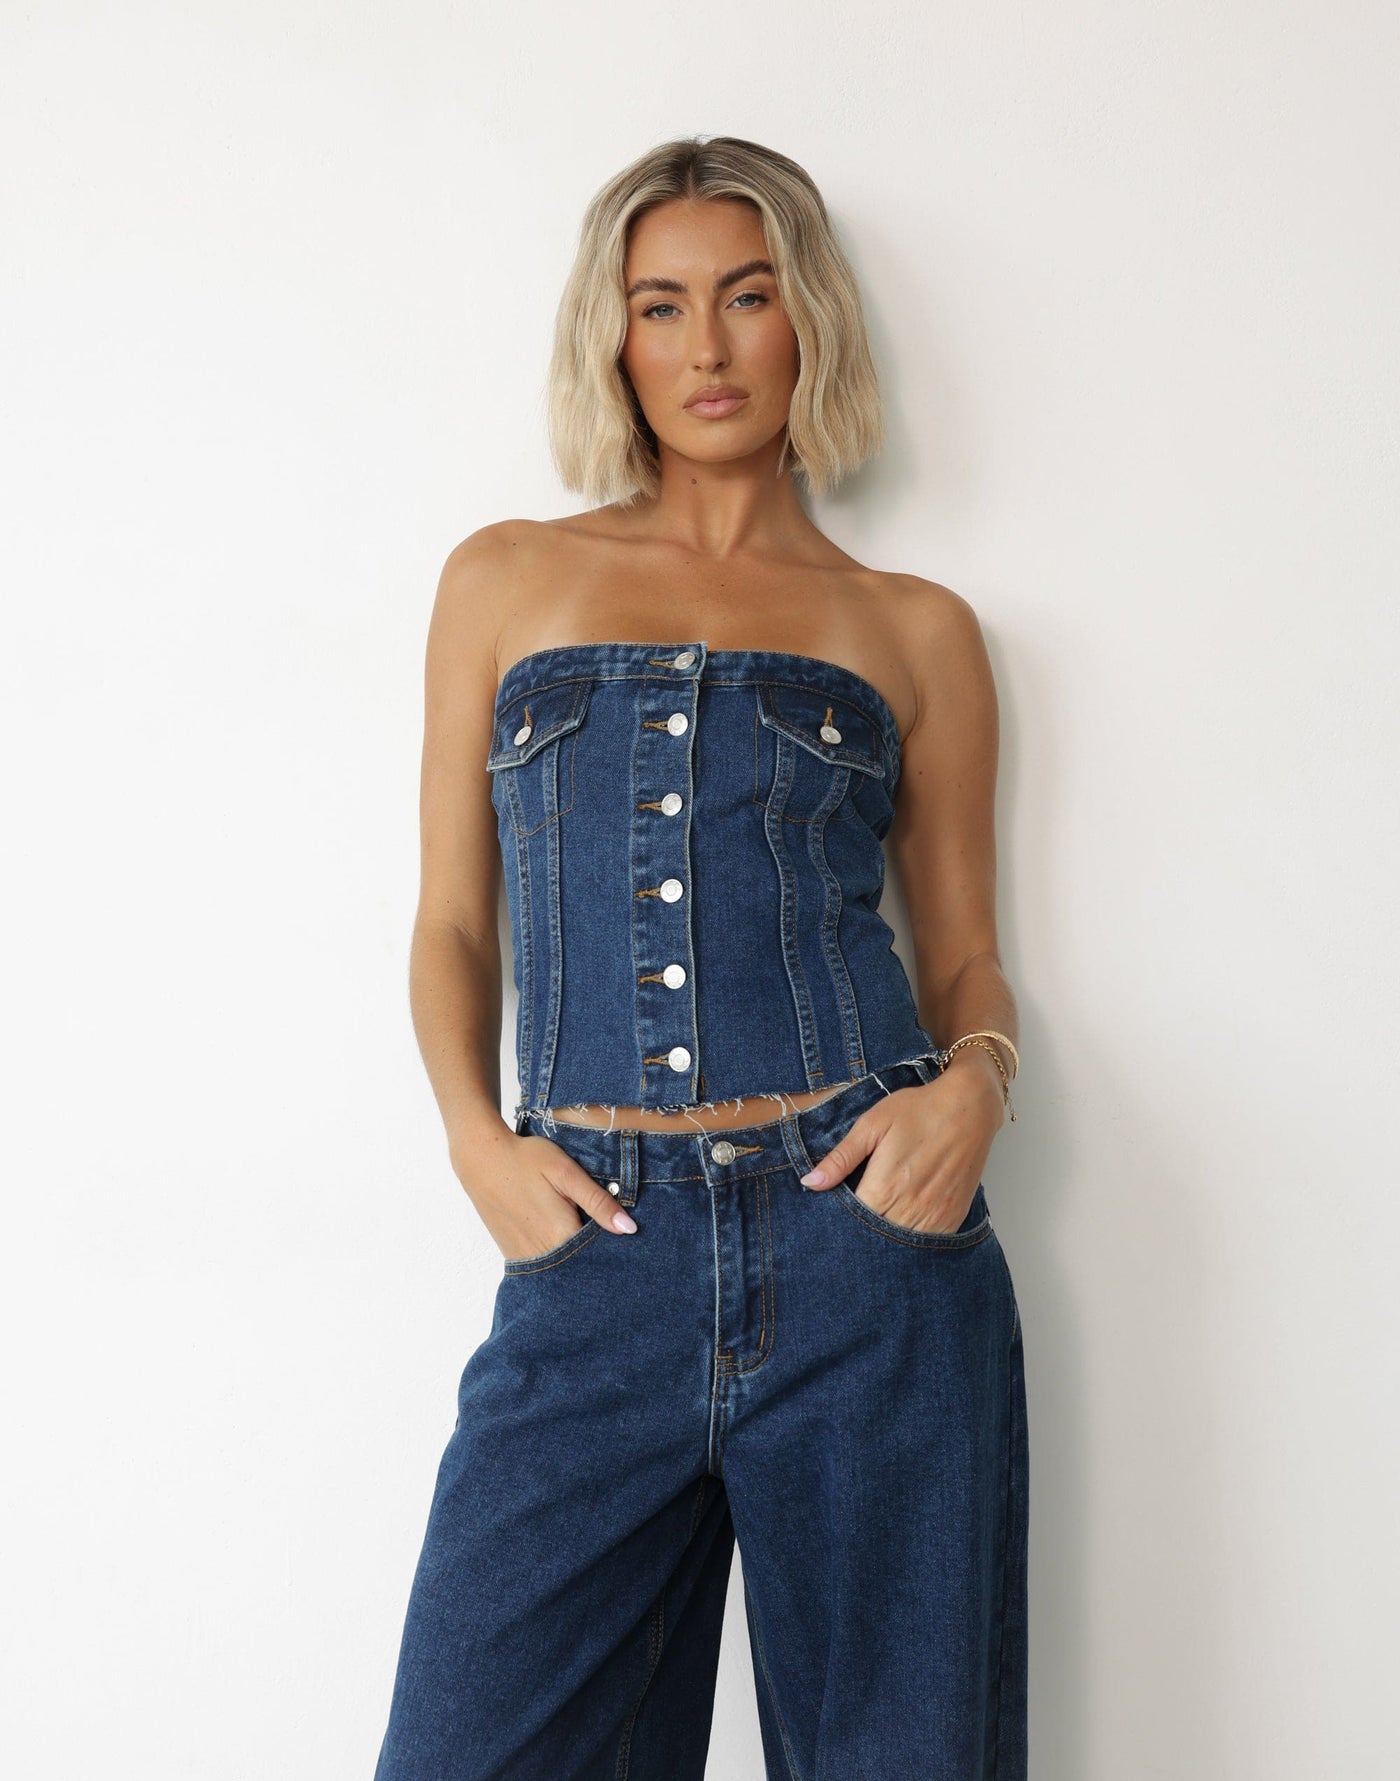 Collision Denim Corset Top (Dark Denim) | CHARCOAL Exclusive - Strapless Button Closure Fitted Top - Women's Top - Charcoal Clothing